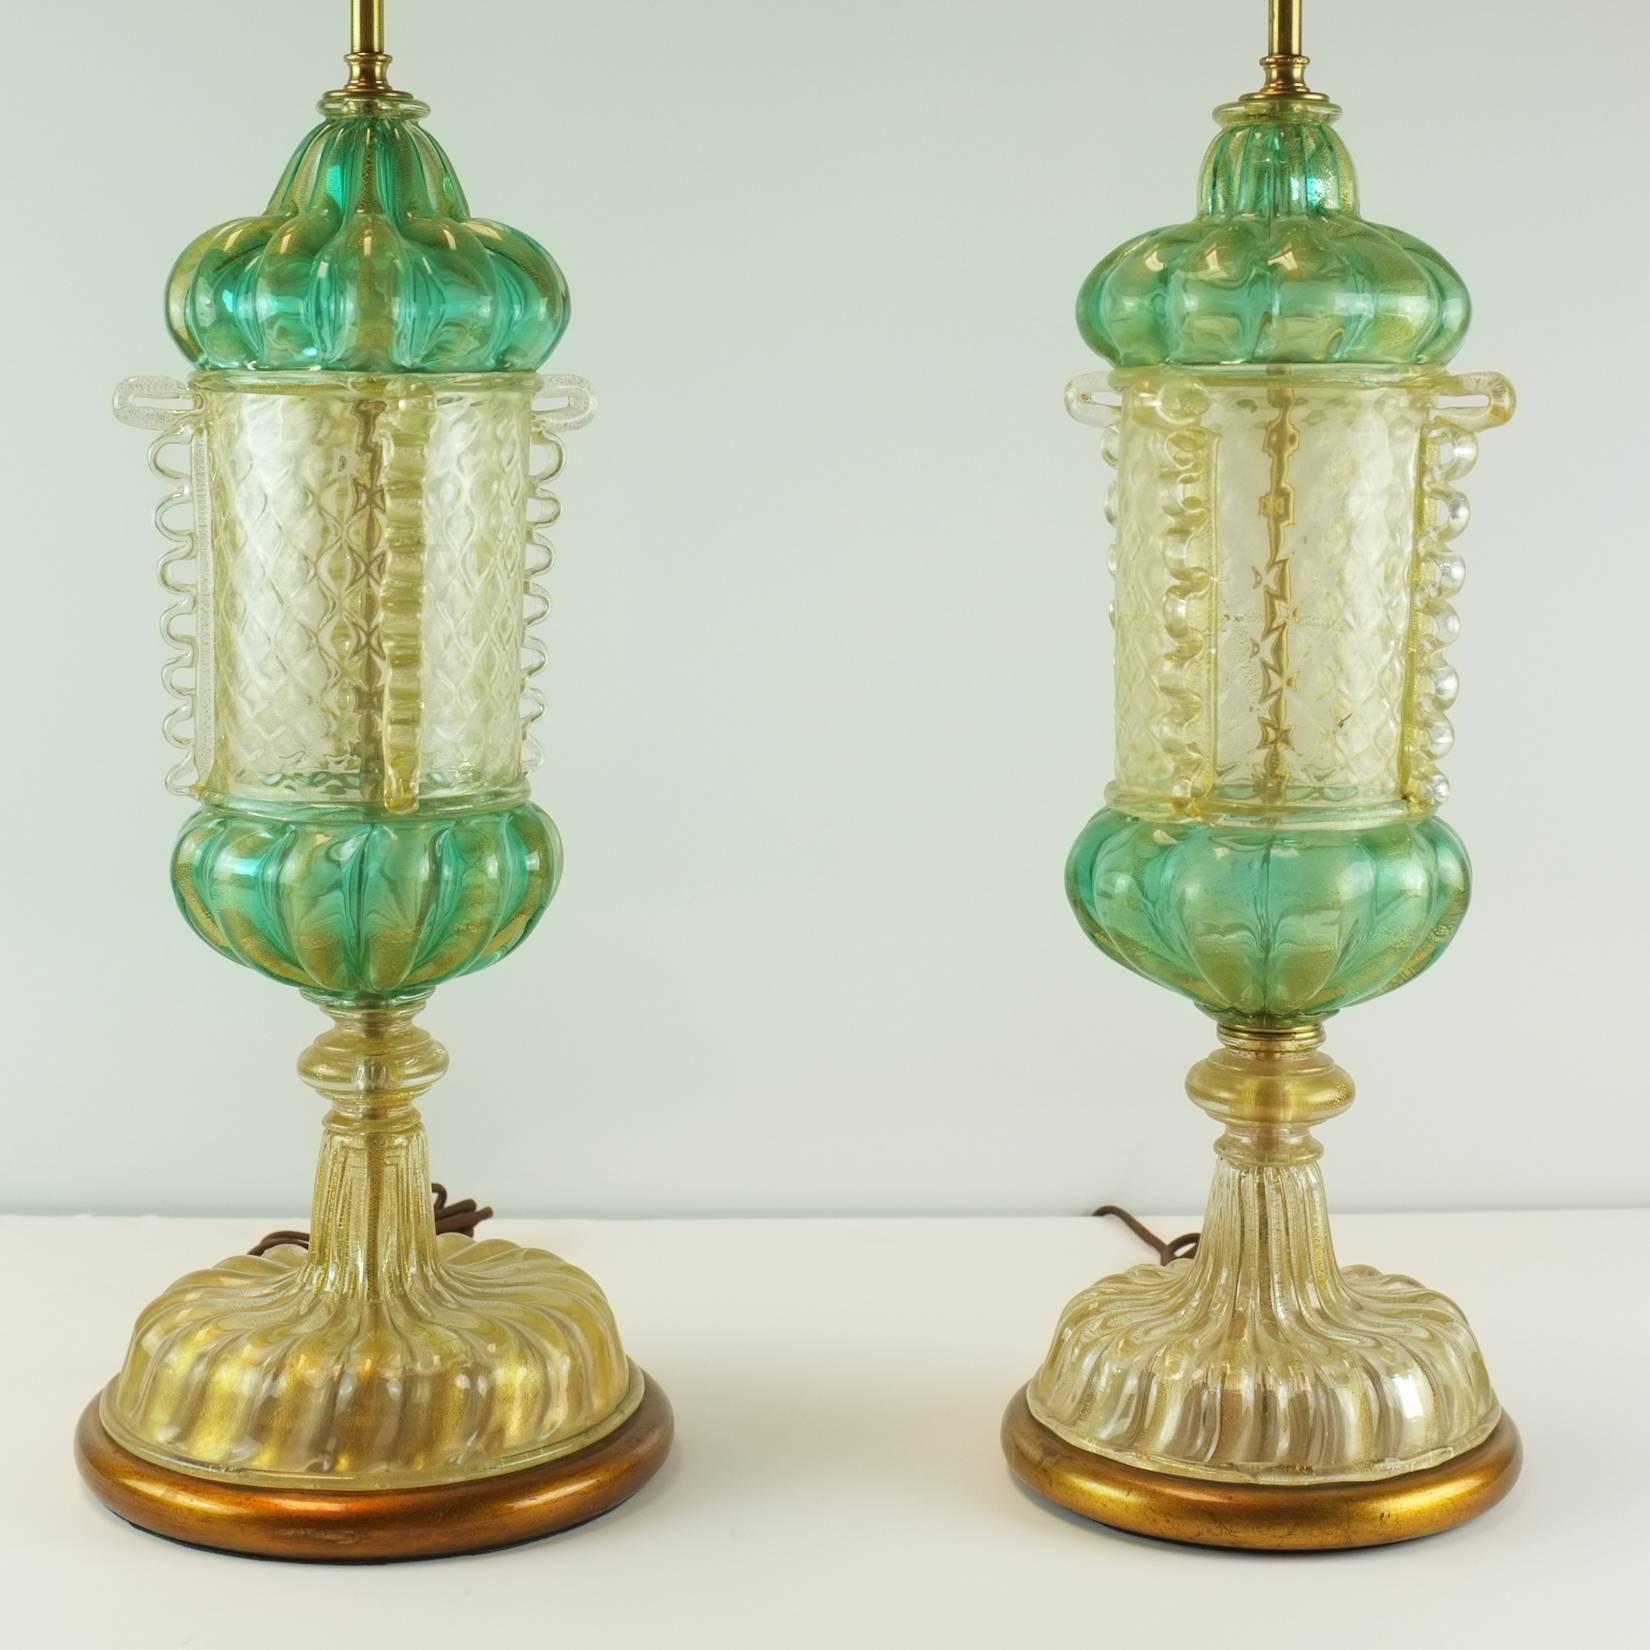 A pair of early 20th century Murano lamps attributed to Barovier. Gold inclusions in both clear of aquamarine glass. Classical canister vase form. Rewired for US use. Height to top of glass is 21